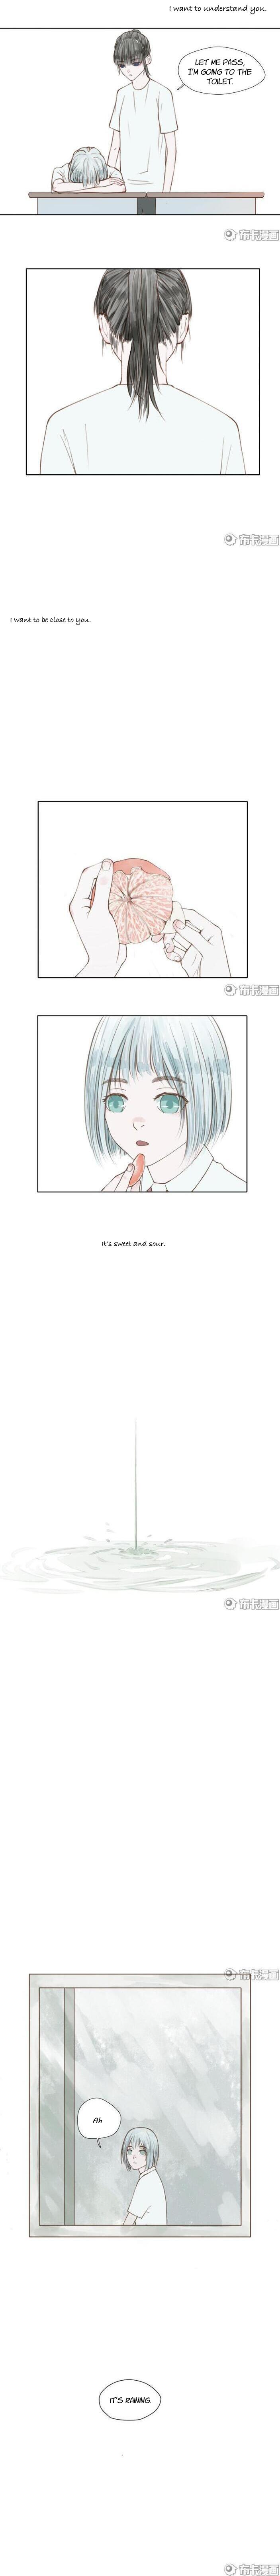 This Is Obviously A Yuri Manhua - Page 3